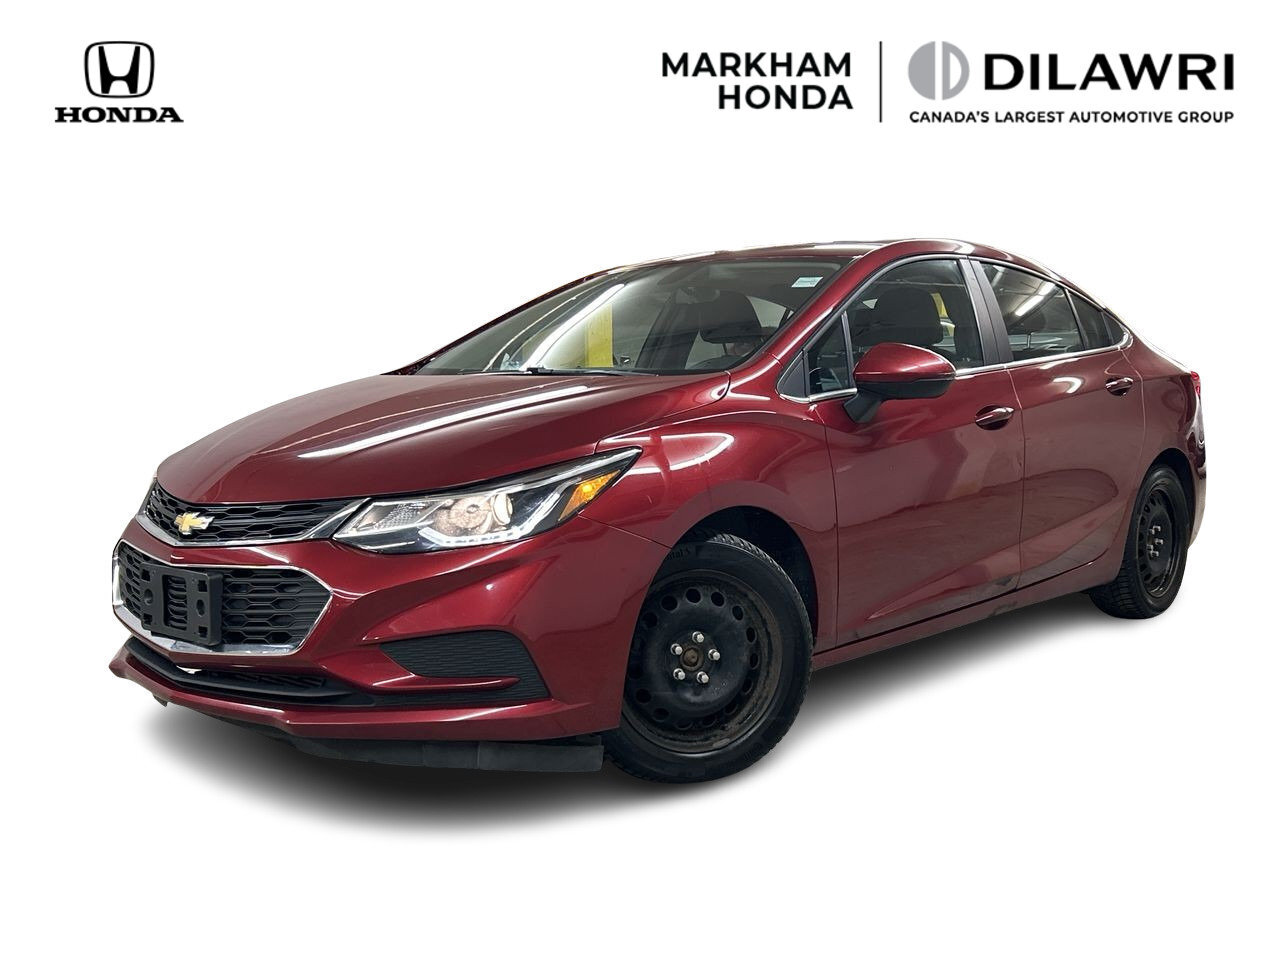 2017 Chevrolet Cruze LT - 6AT 2 Sets Rims/TIres | Accident Free | Dilaw